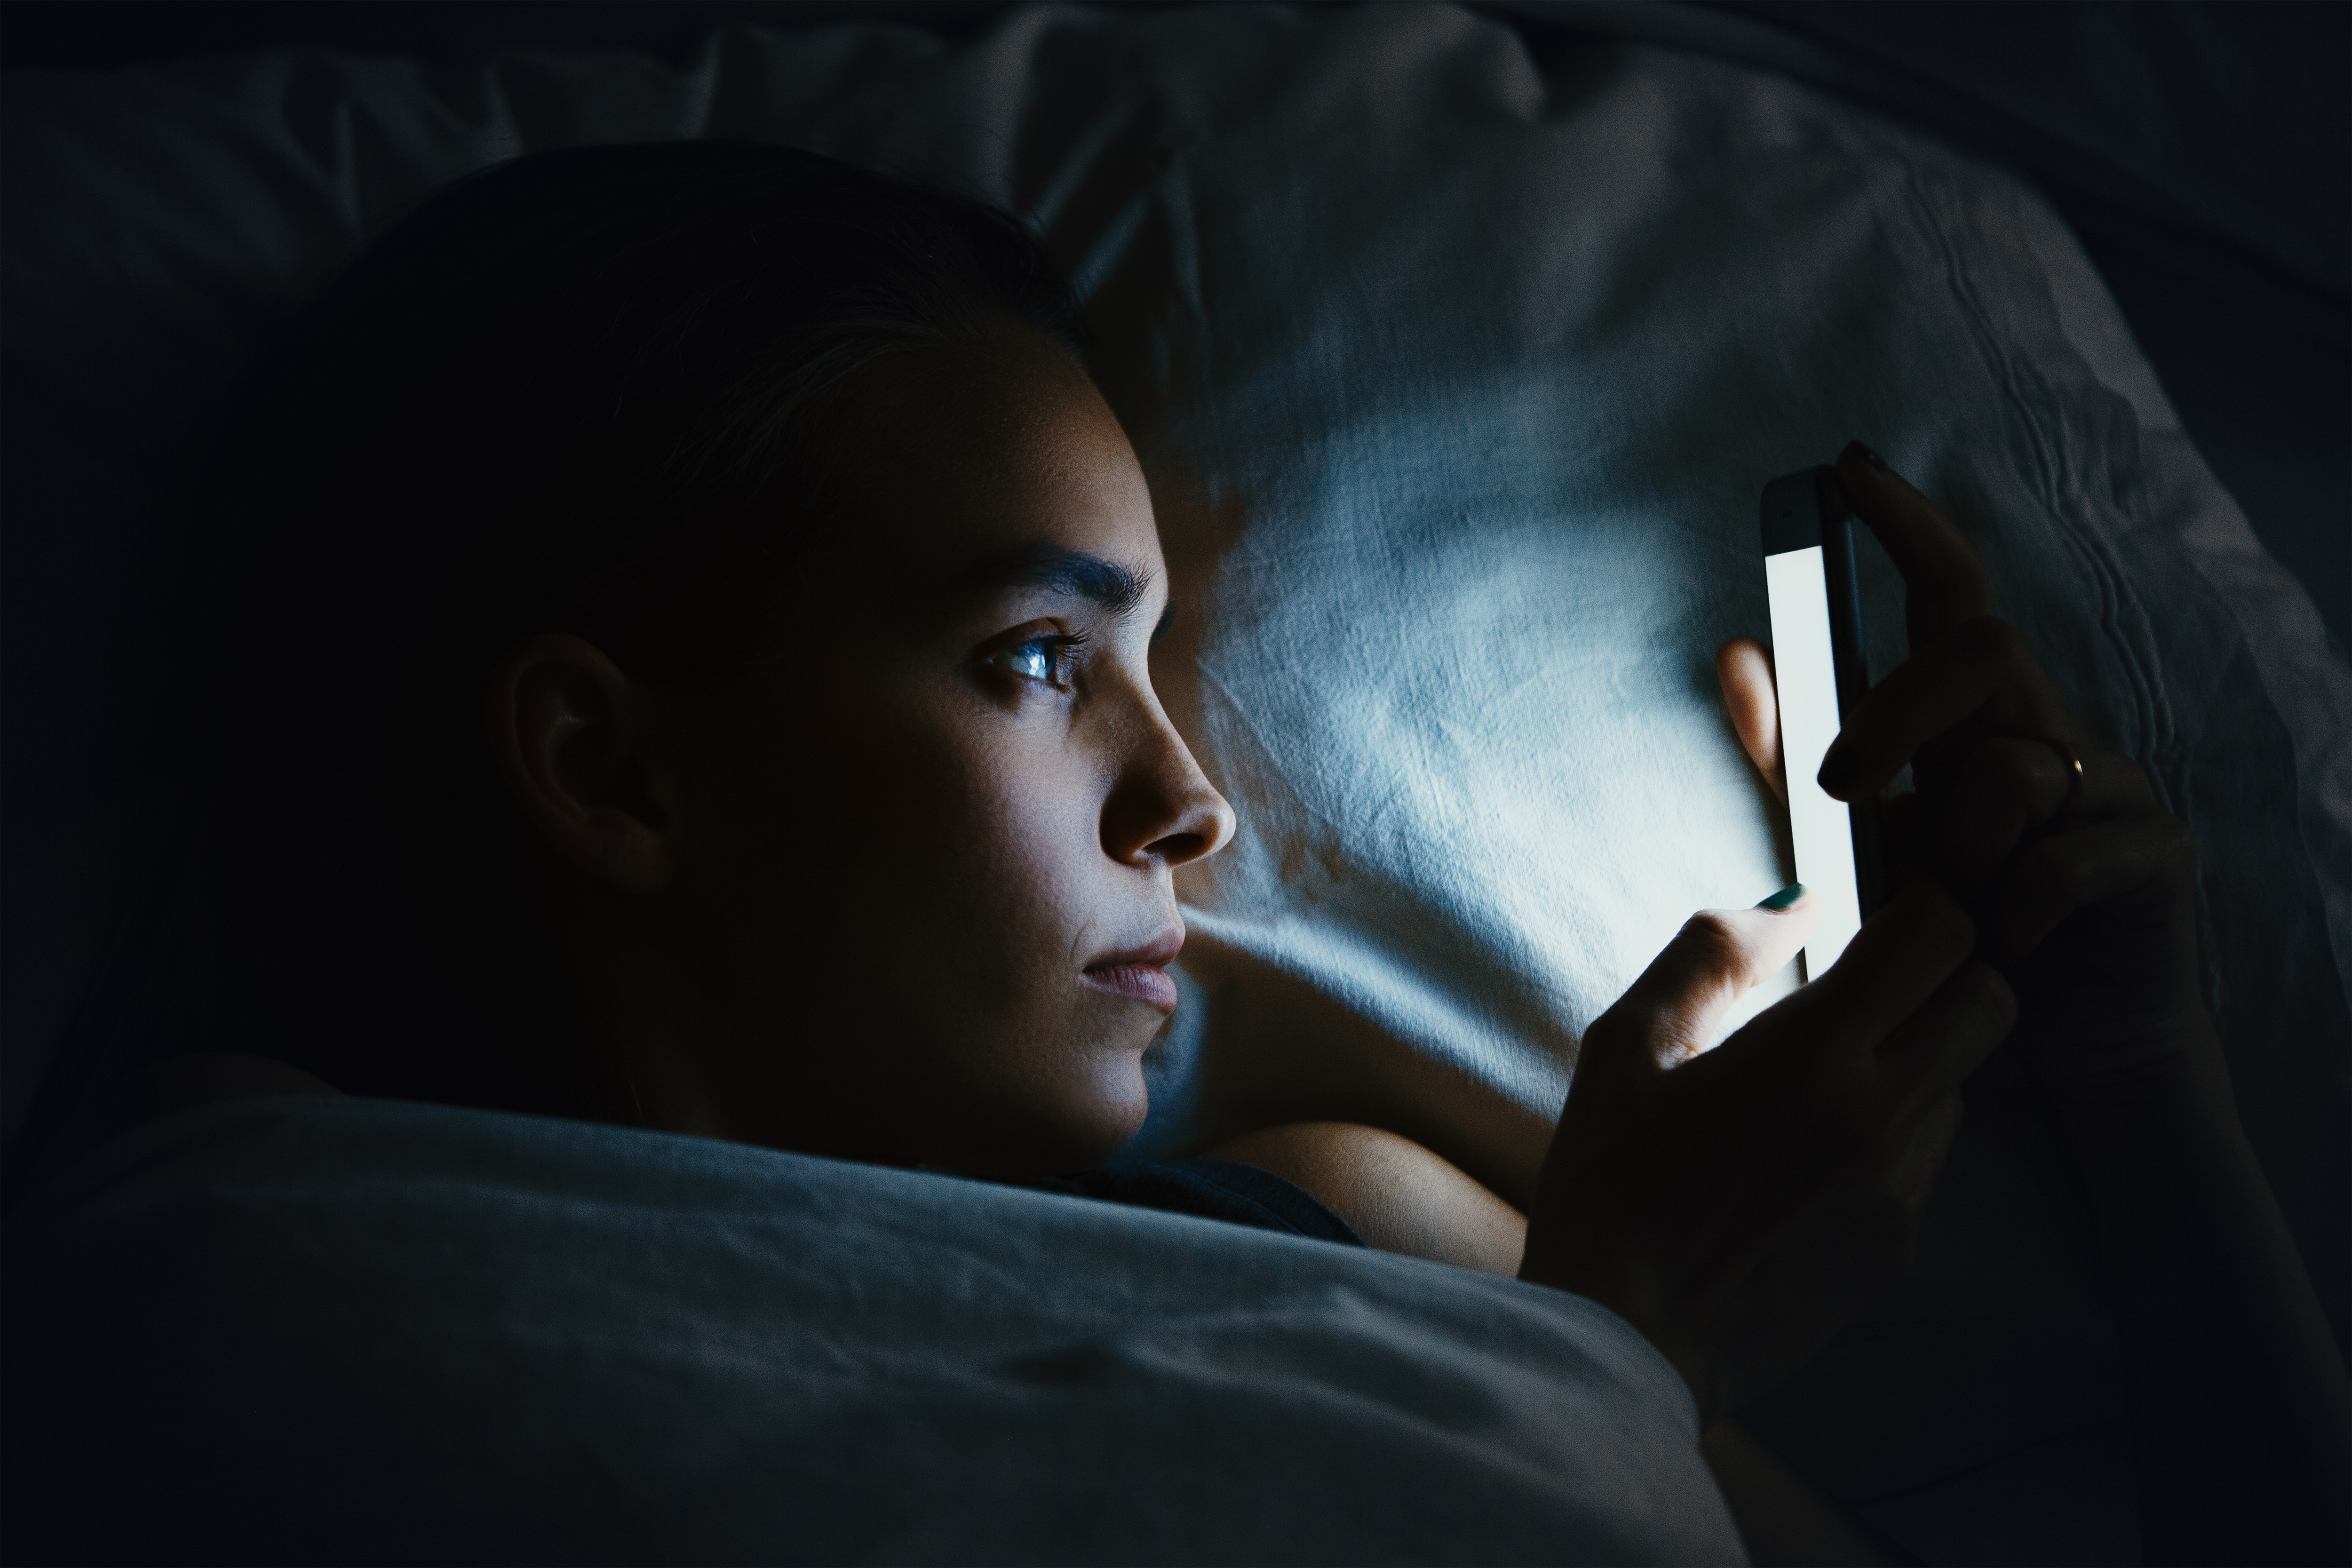 A woman on her phone at night  | Source: Shuttertsock